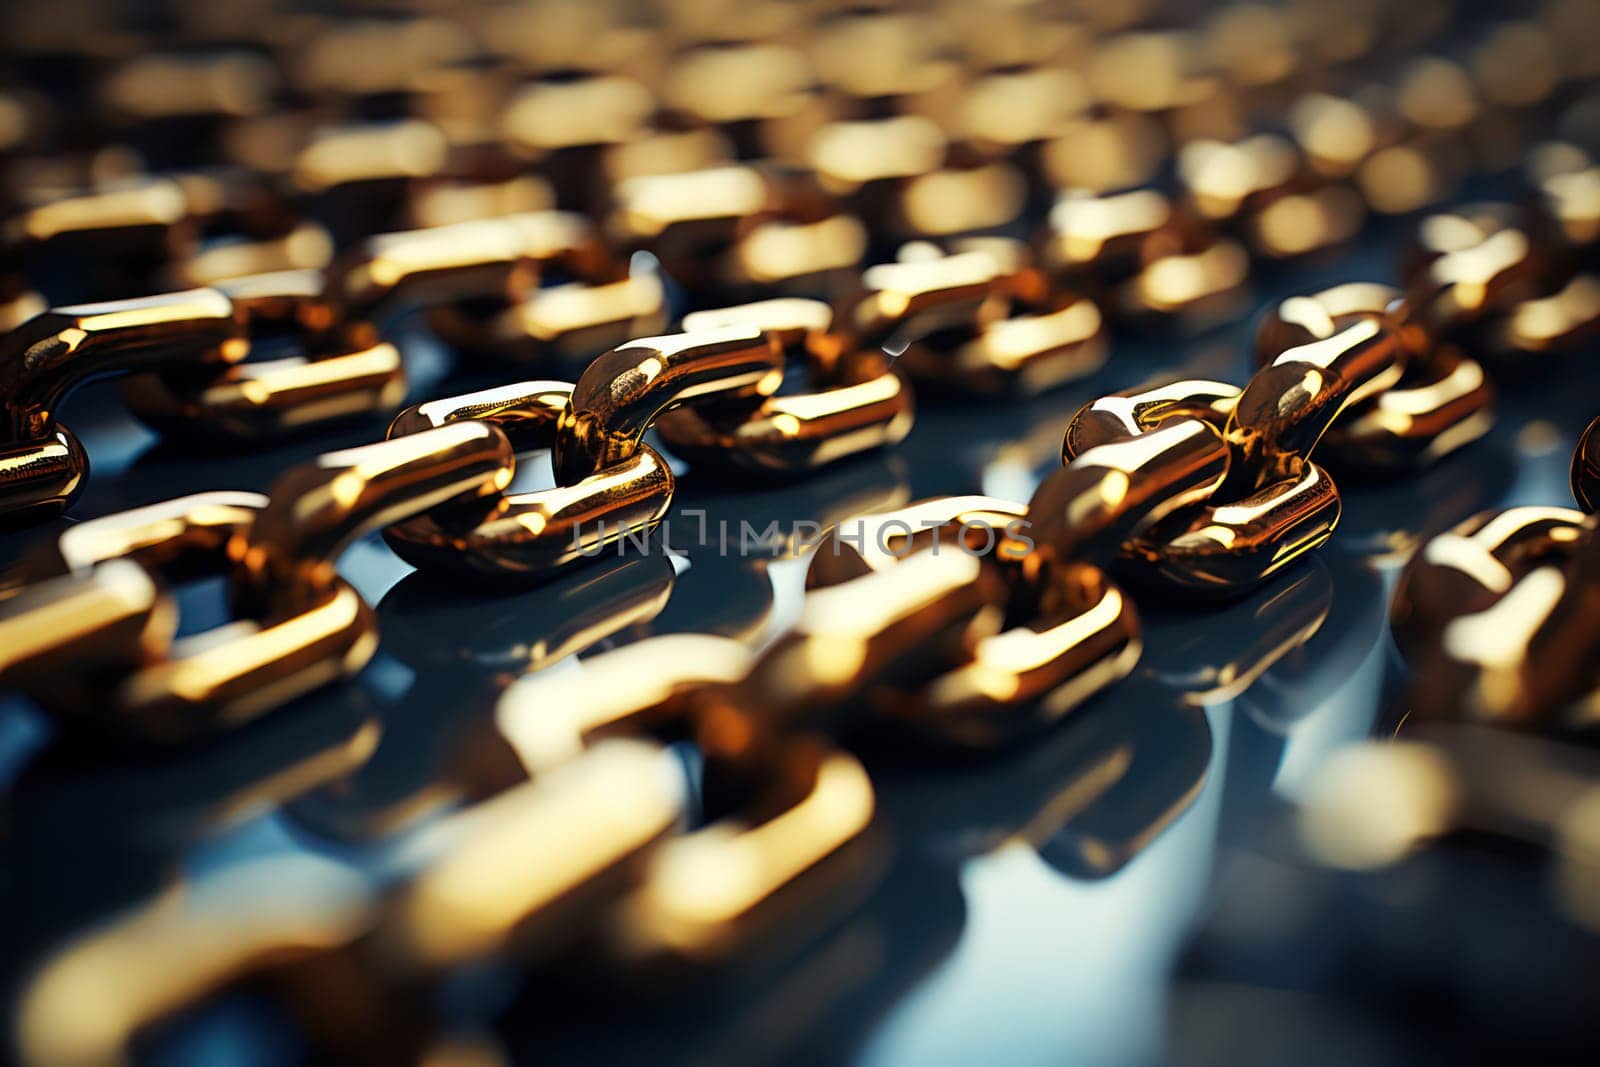 The Strong Link of Security: Shiny Steel Chains Connecting Power and Strength in Industrial Background by Vichizh